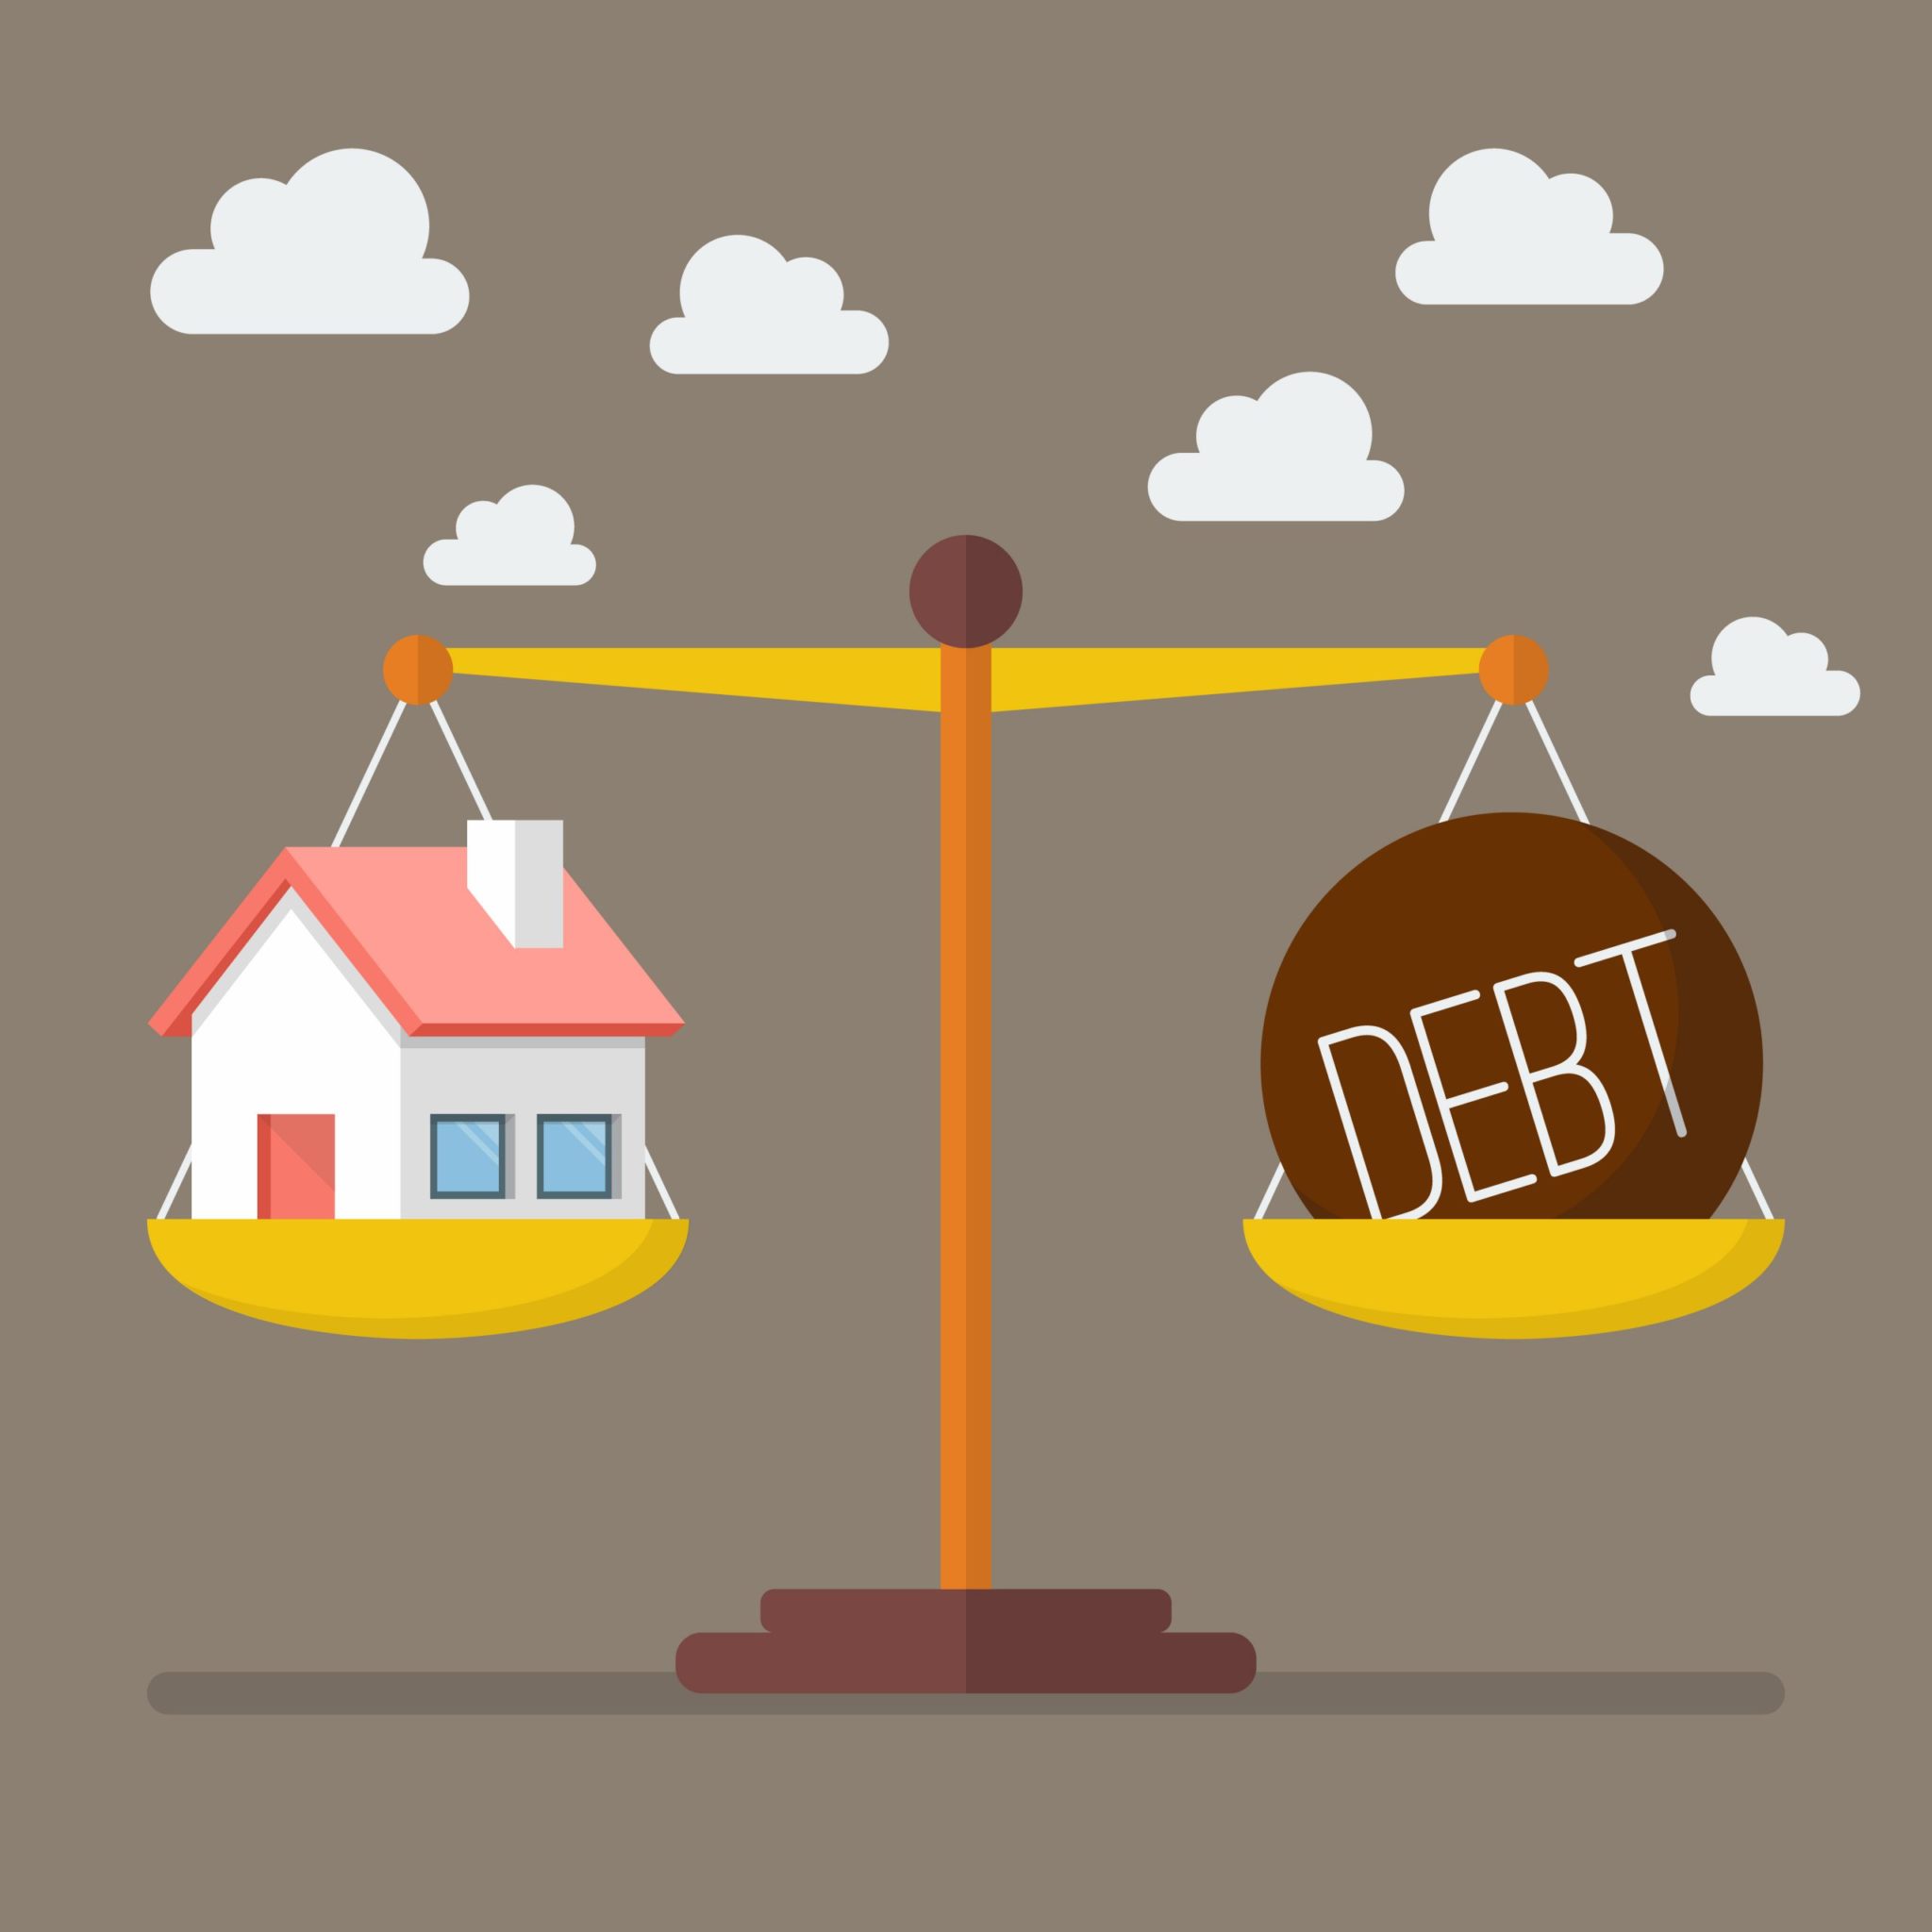 Good Debt House and debt balance on the scale